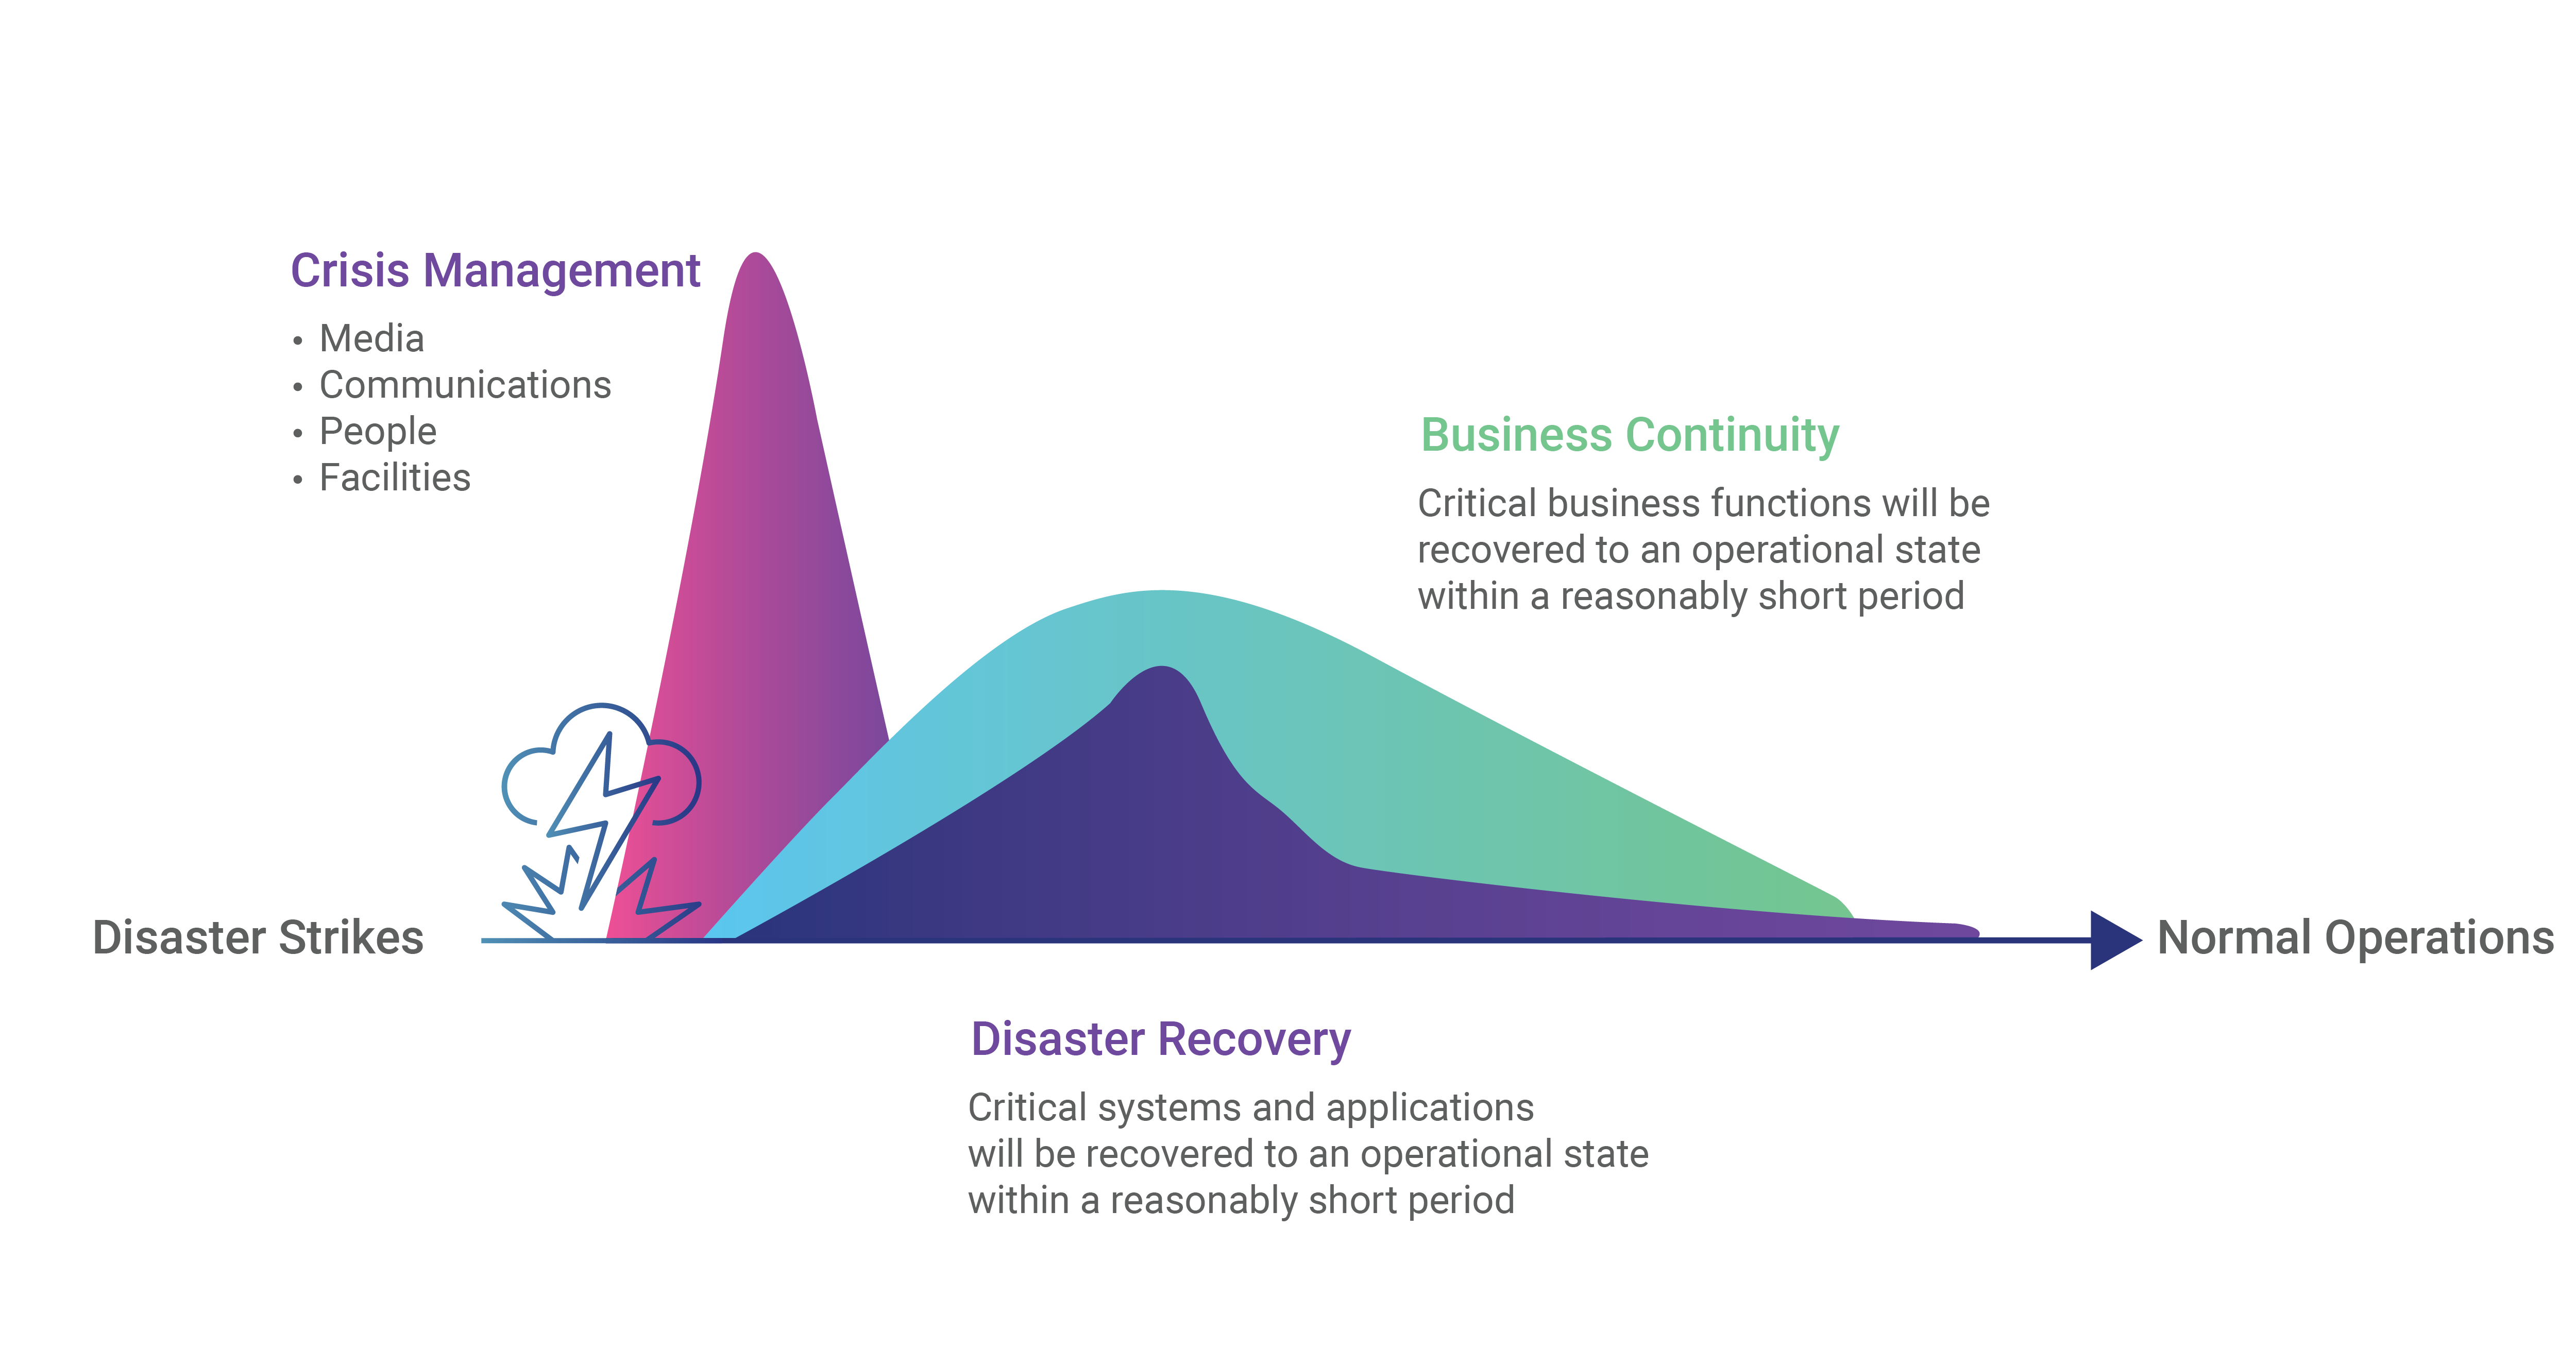 Traditional model of crisis management, business continuity, and disaster recovery